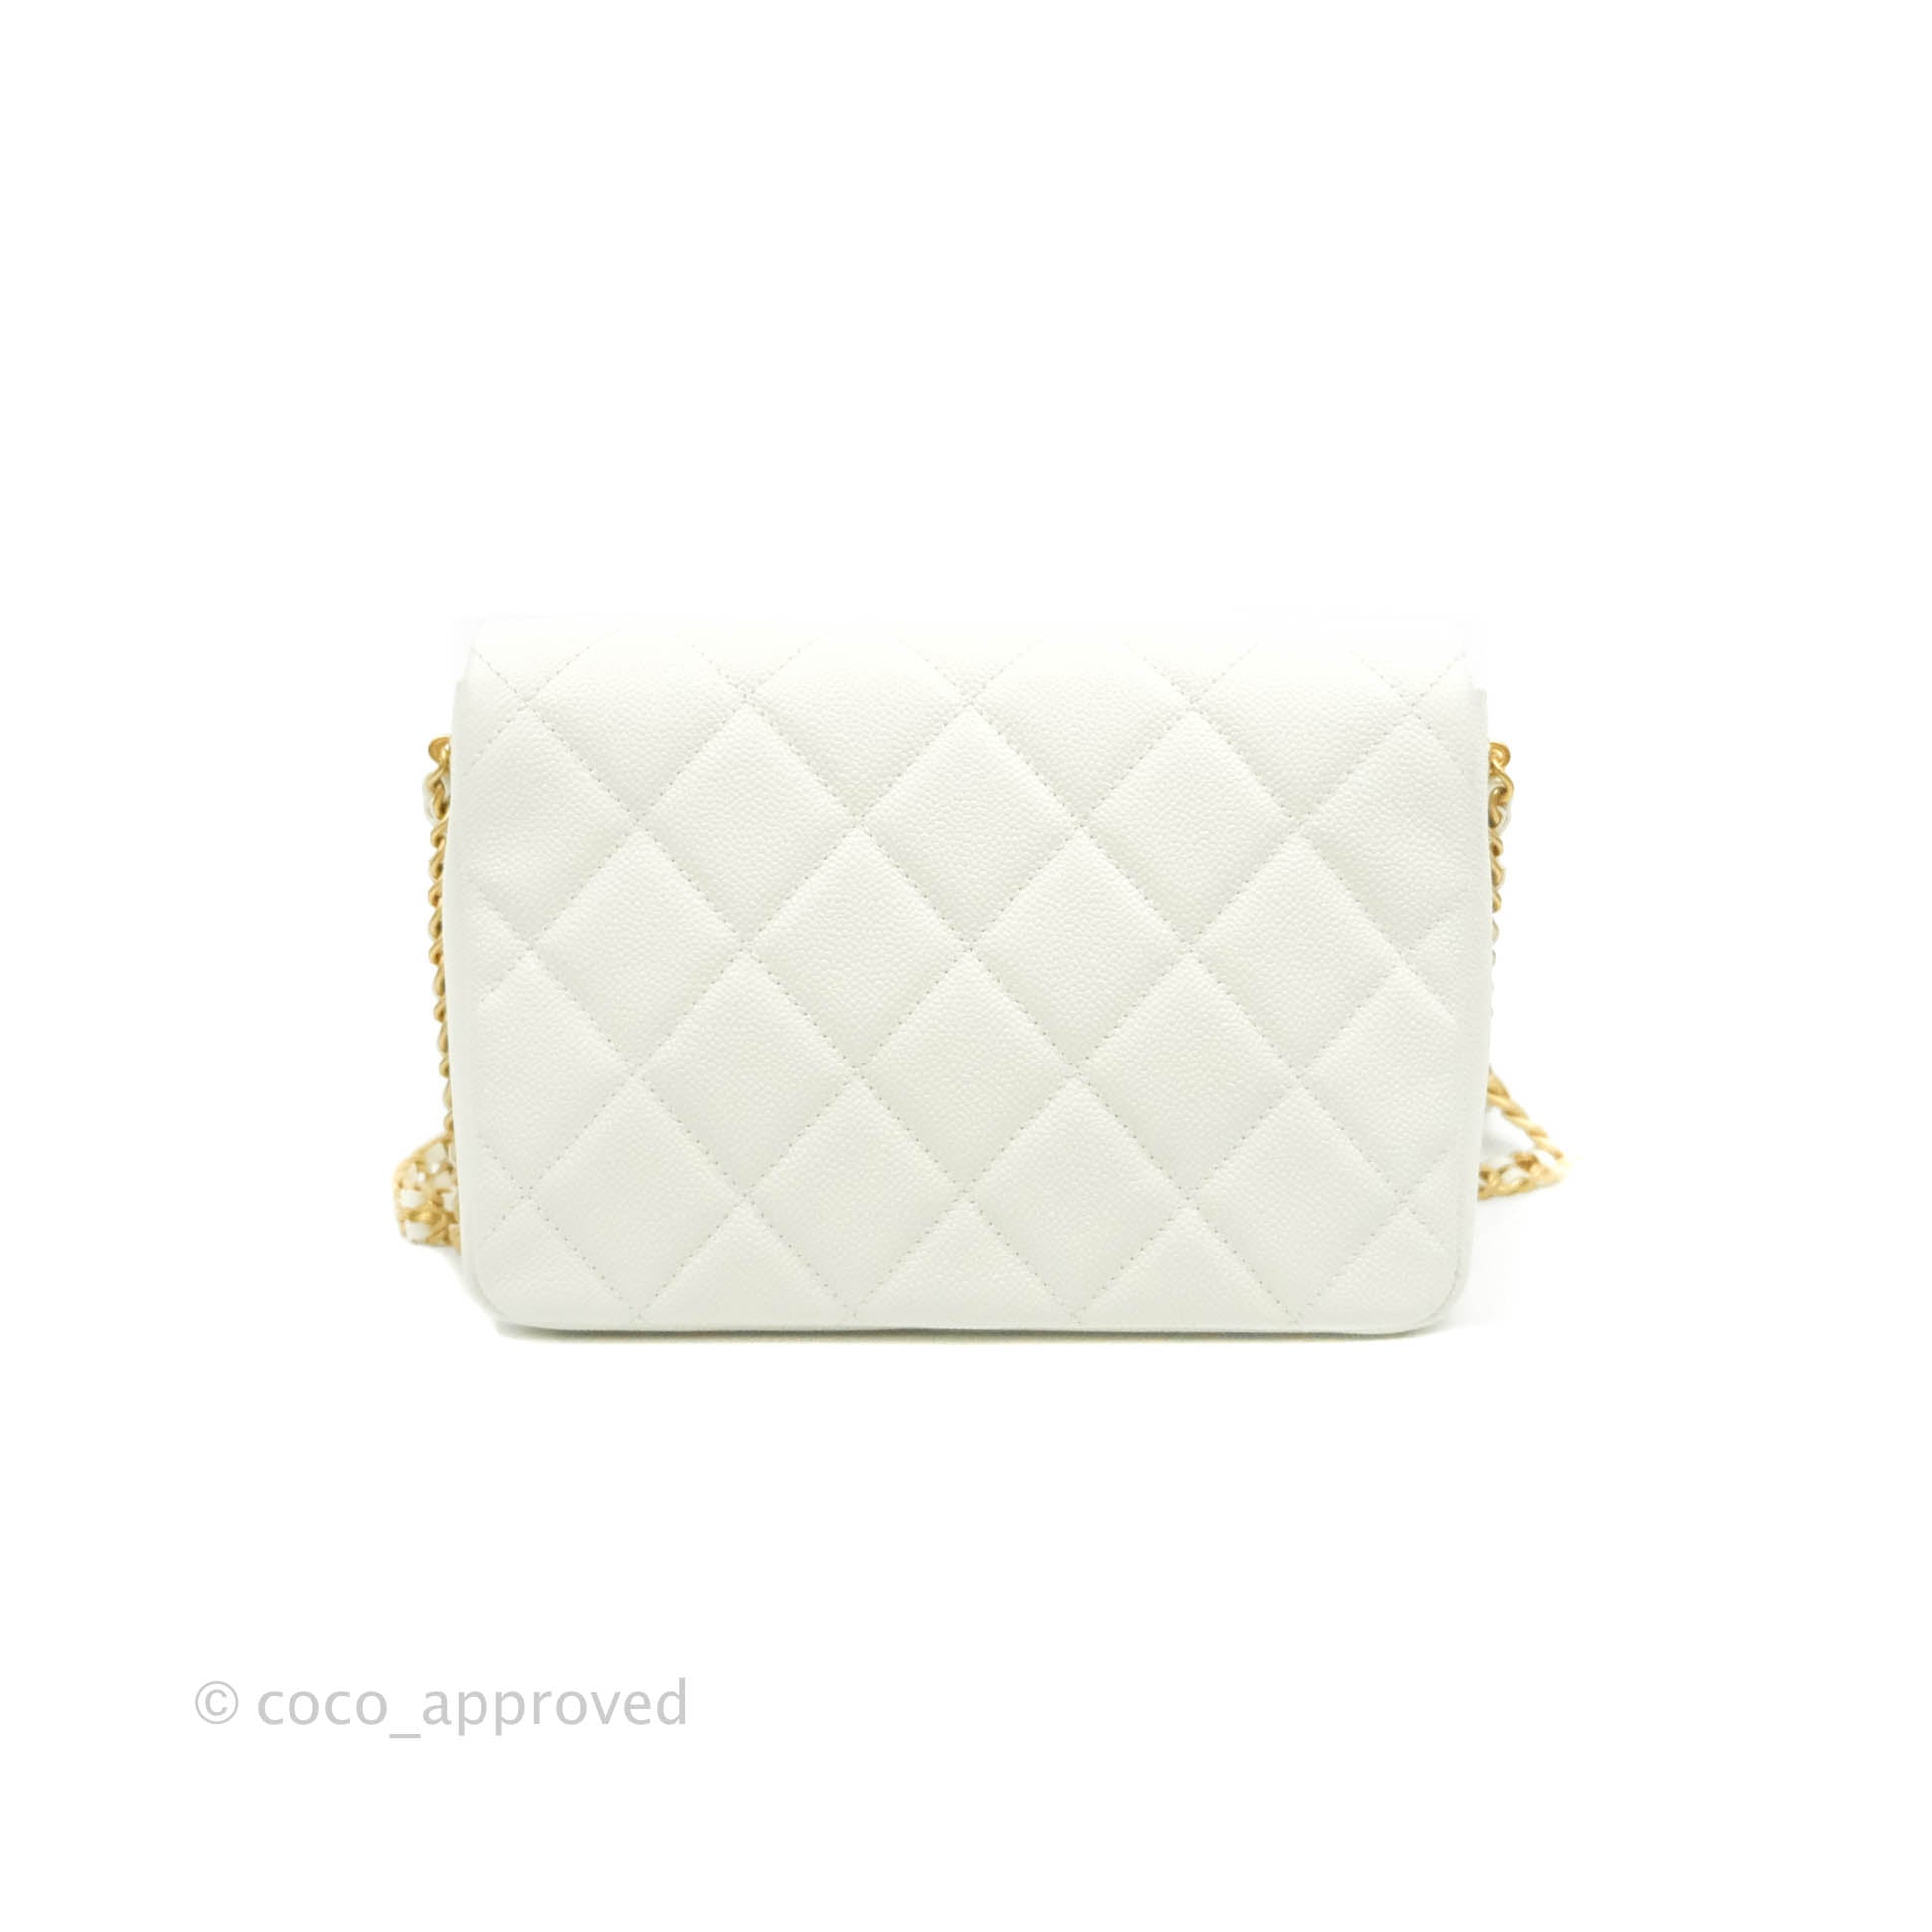 Chanel White Quilted Lambskin Mini Flap Bag Gold And Imitation